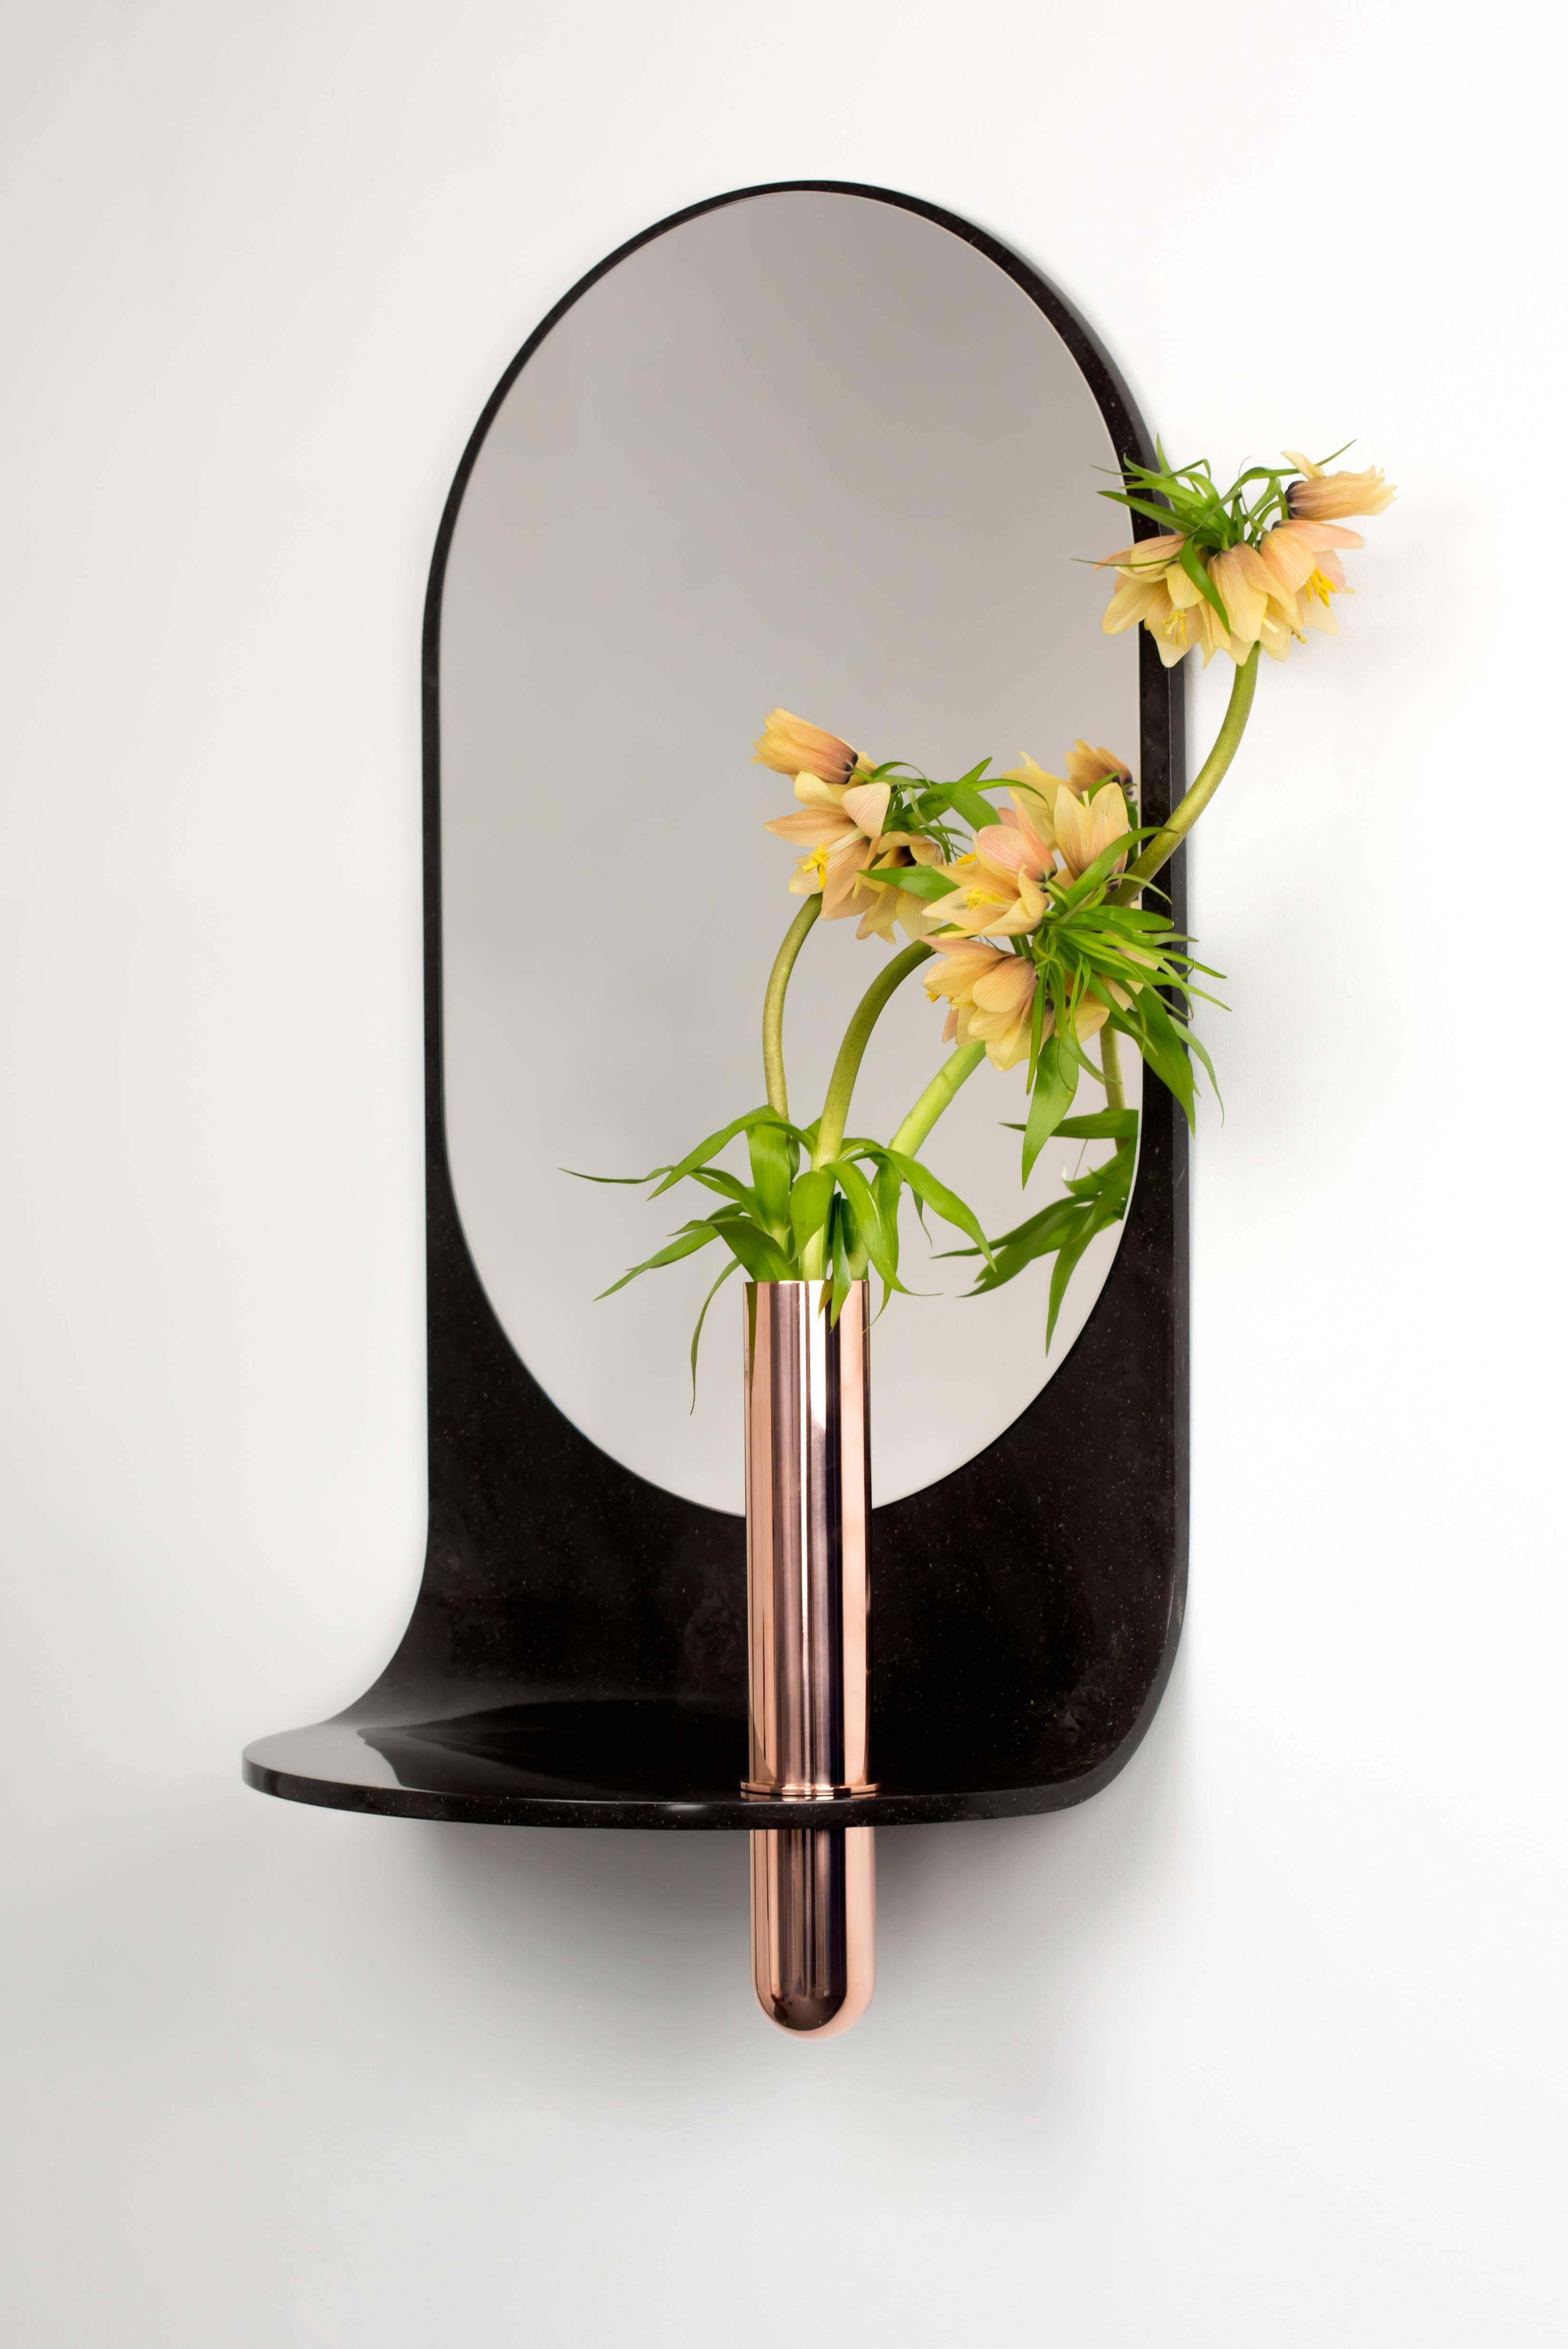 Contemporary Stone Wall Mirror with Vase and Shelf by Birnam Wood Studio